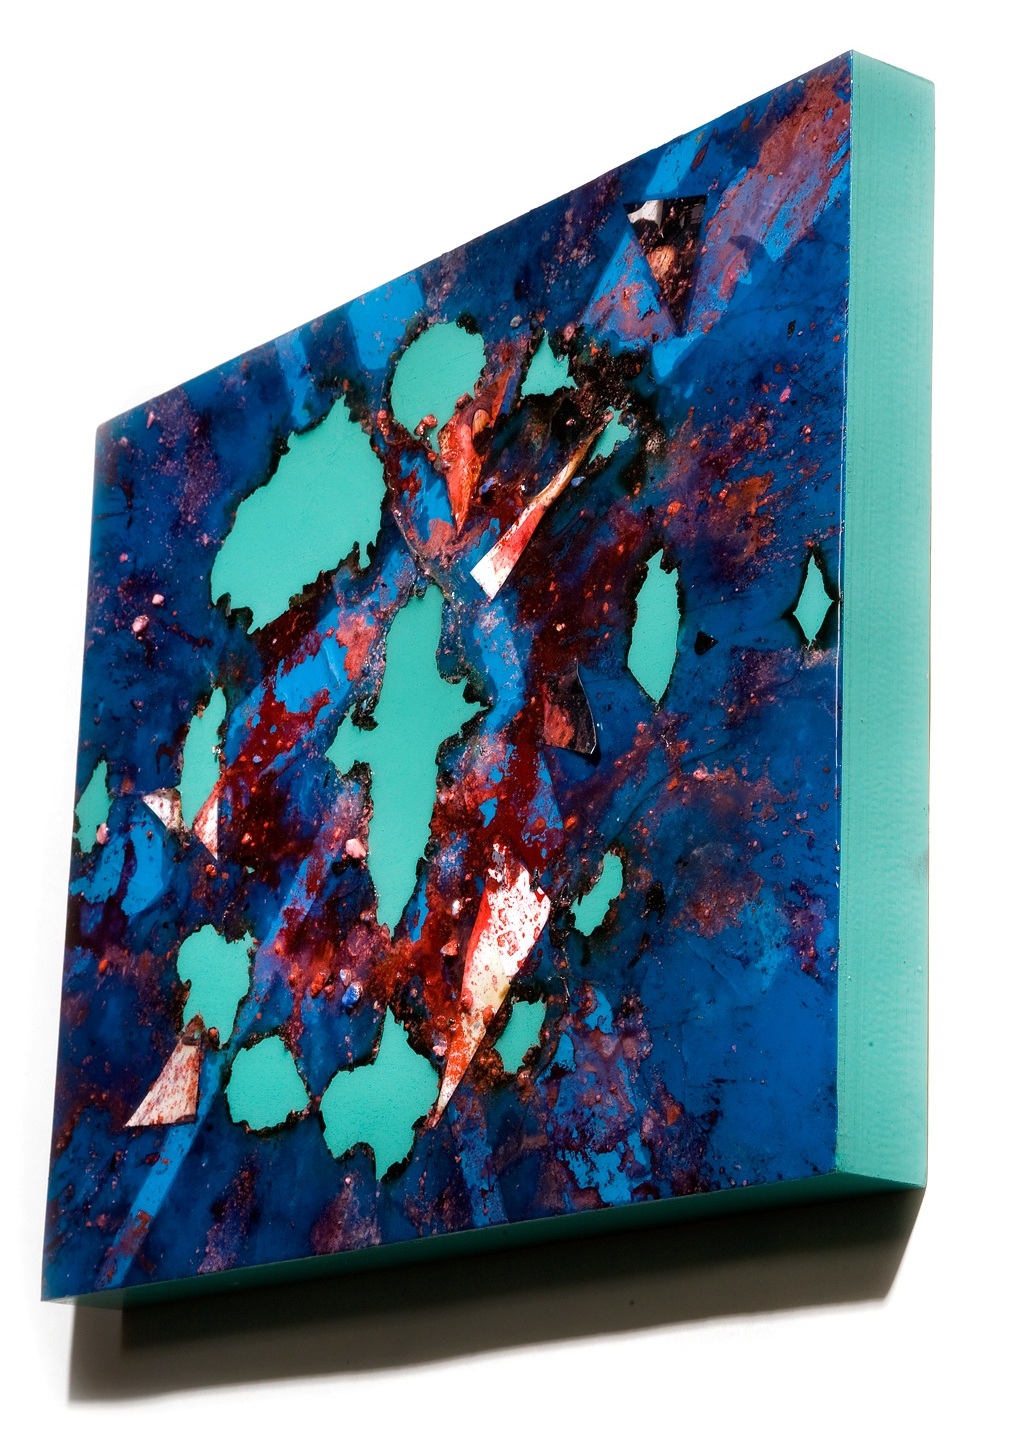 SERIE I, Untitled SIDE VIEW (blue/malachite), photographs, photo background paper, chalk, spray paint, packing tape, powder drink, glue, epoxy resin on wood panel, 16"x20"x2", 2019